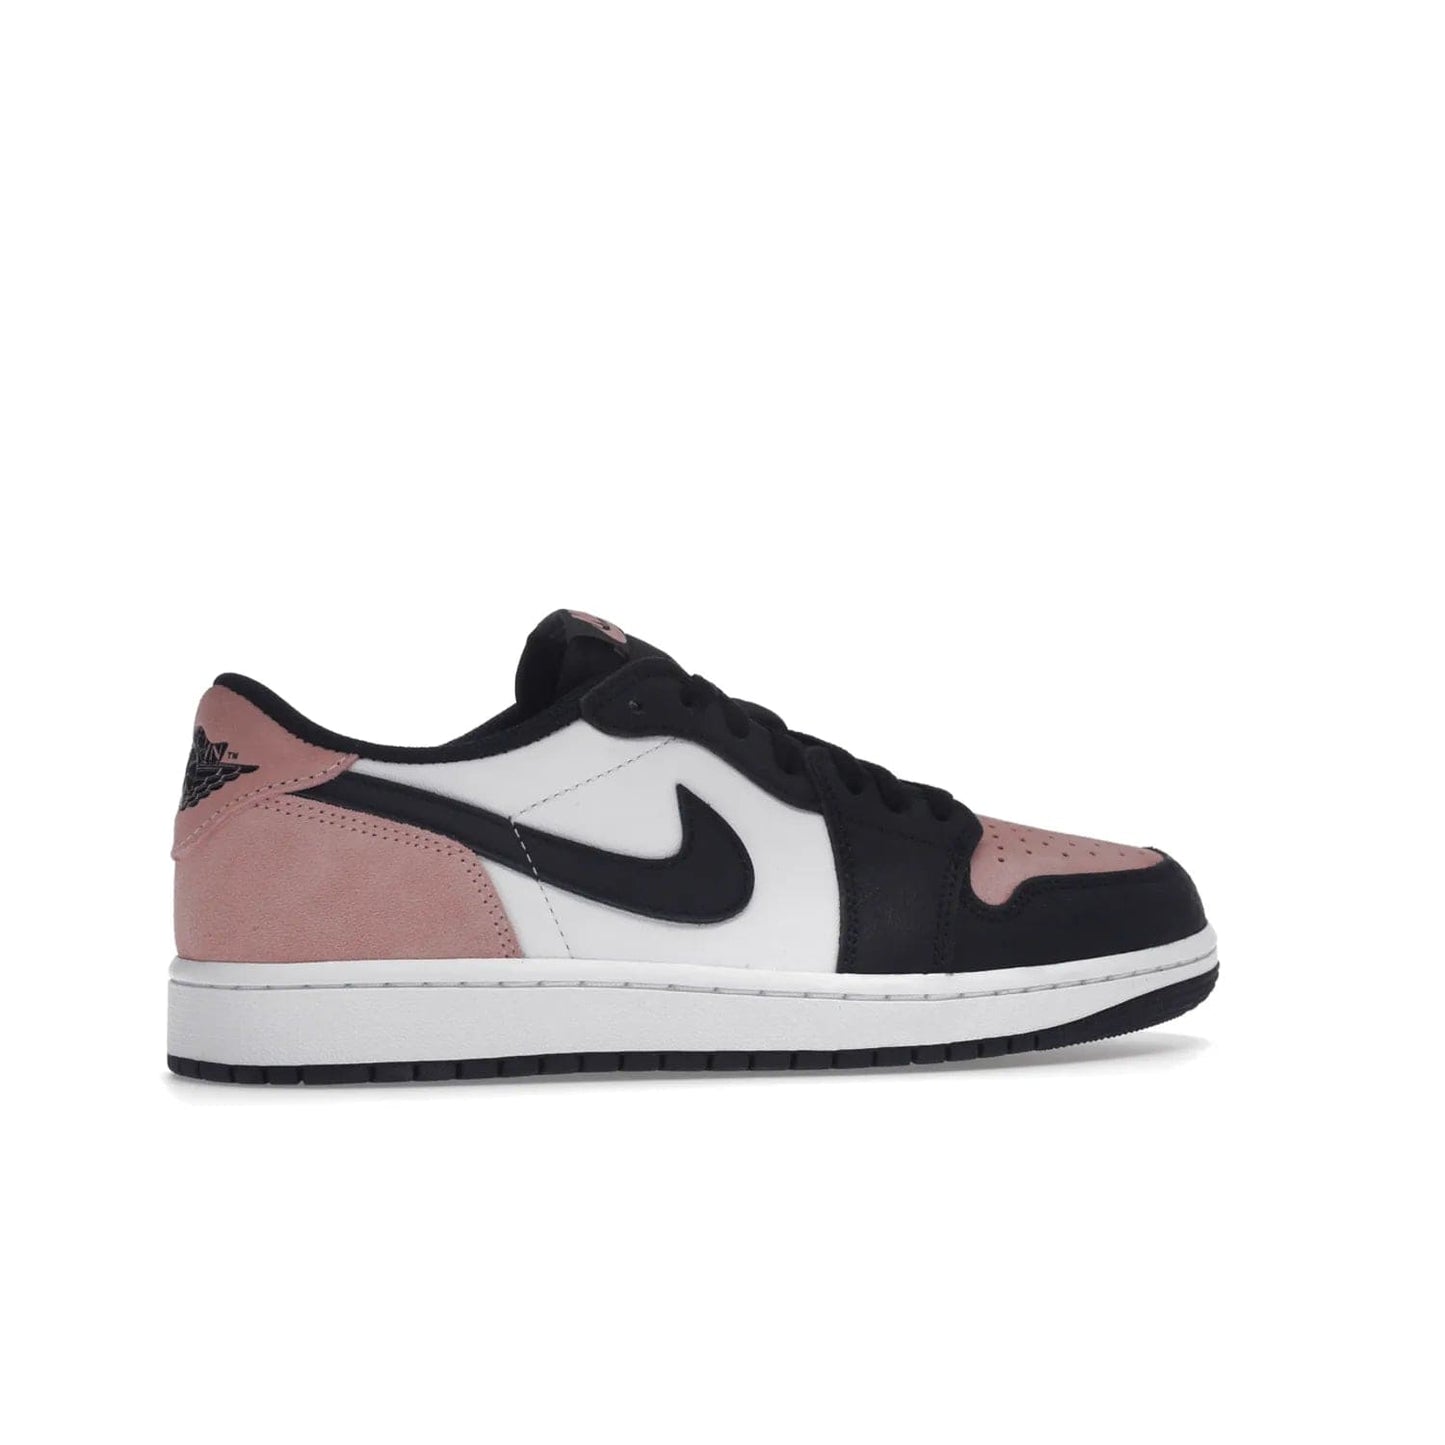 Jordan 1 Low OG Bleached Coral - Image 35 - Only at www.BallersClubKickz.com - Introducing the Air Jordan 1 Low OG Bleached Coral. Constructed with white leather, black cracked leather & Bleached Coral suede. Signature Jordan Wings logo, white Air sole. Get the pack in July 2022 and stand out.